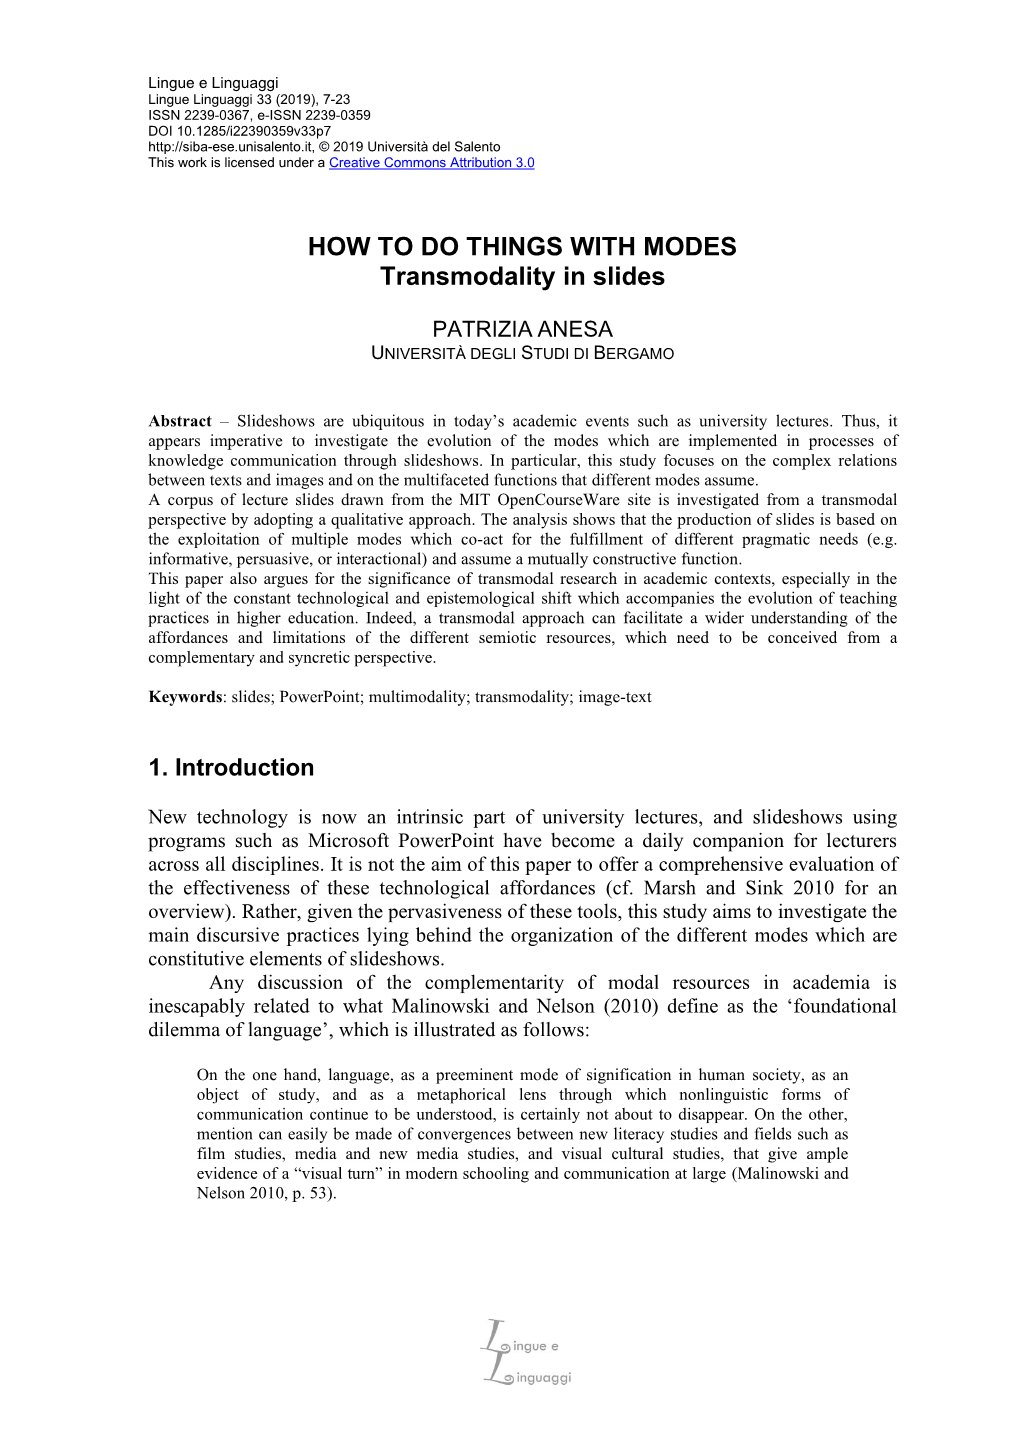 HOW to DO THINGS with MODES Transmodality in Slides